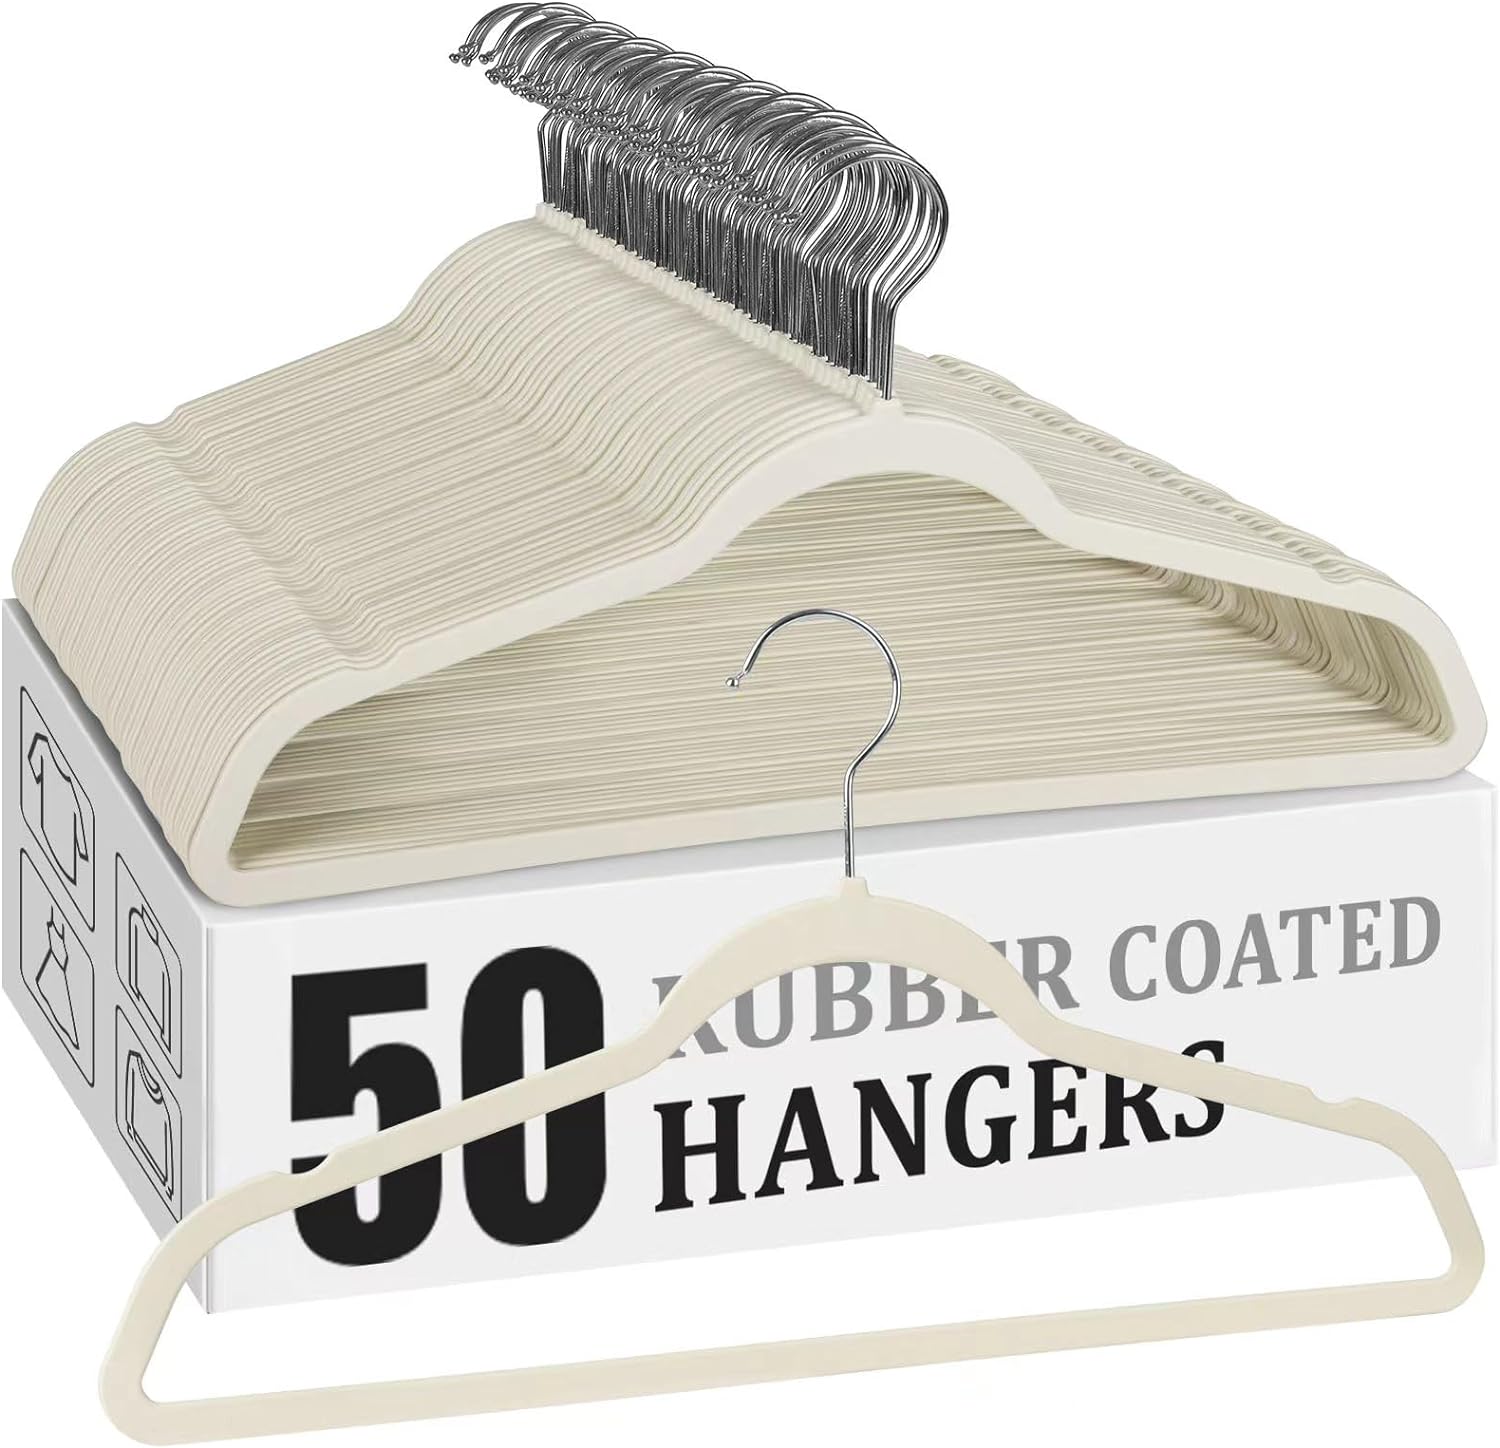 Read more about the article Rubber Coated Plastic Hangers 50 Pack, 17.5 Inches Wide, Non-Slip, Heavy-Duty for ONLY $19.99 (Was $23.99)